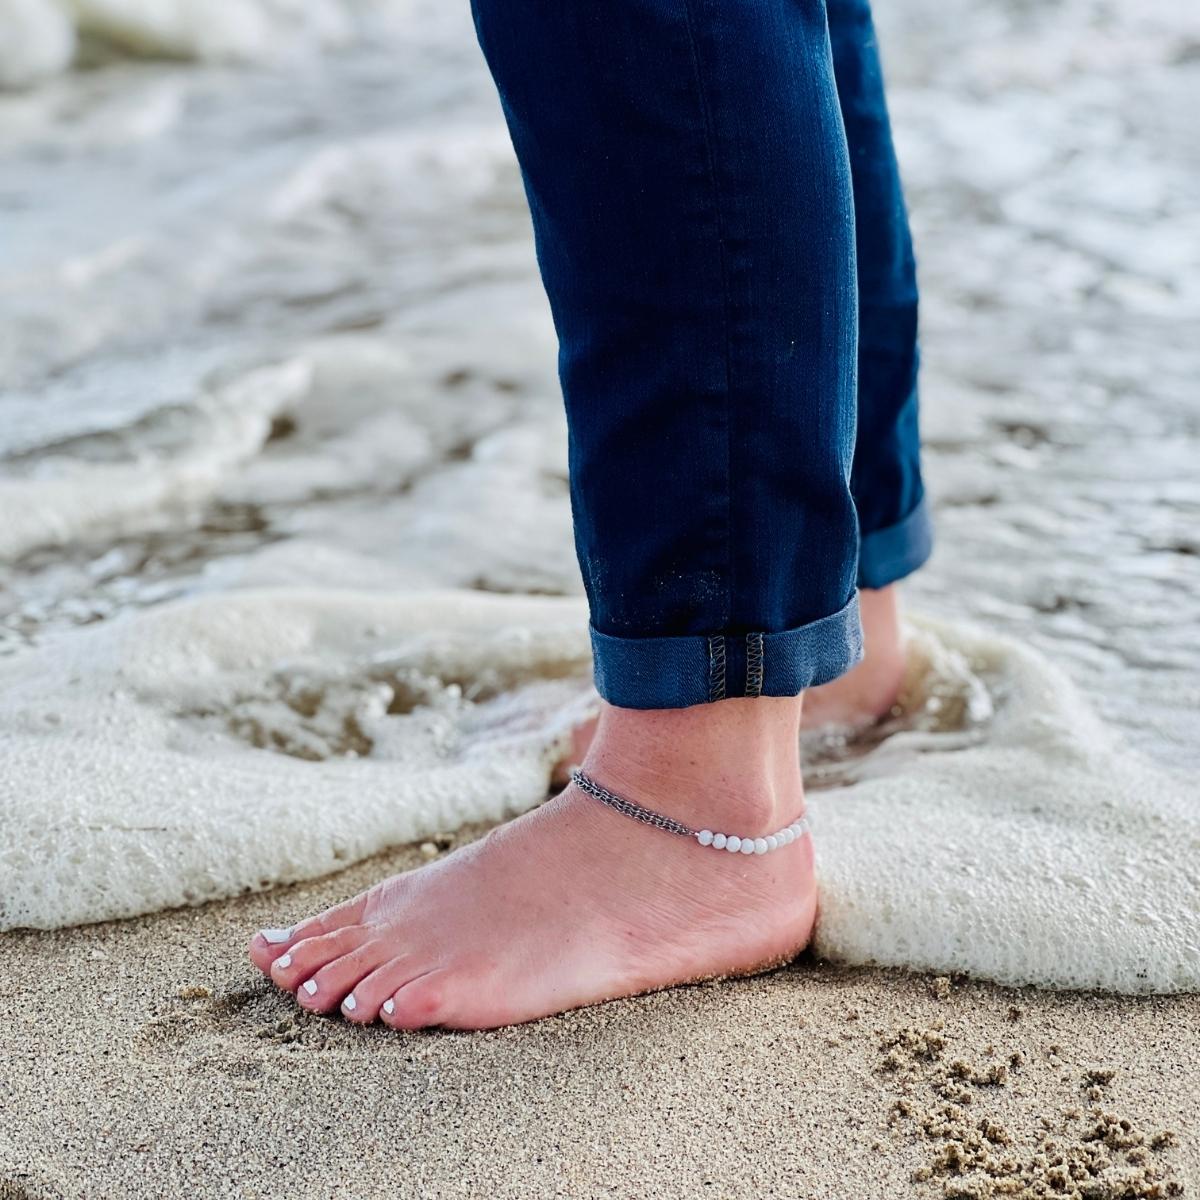 Neptunic SharkSuit Anklet - Sustainable Fashion for Ocean Lovers. People of the Water is dedicated to changing people's relationship with our aquatic world through Exploration, Education, and Conservation. Portions of the sale of this jewelry supports the People of the Water Non-Profit.